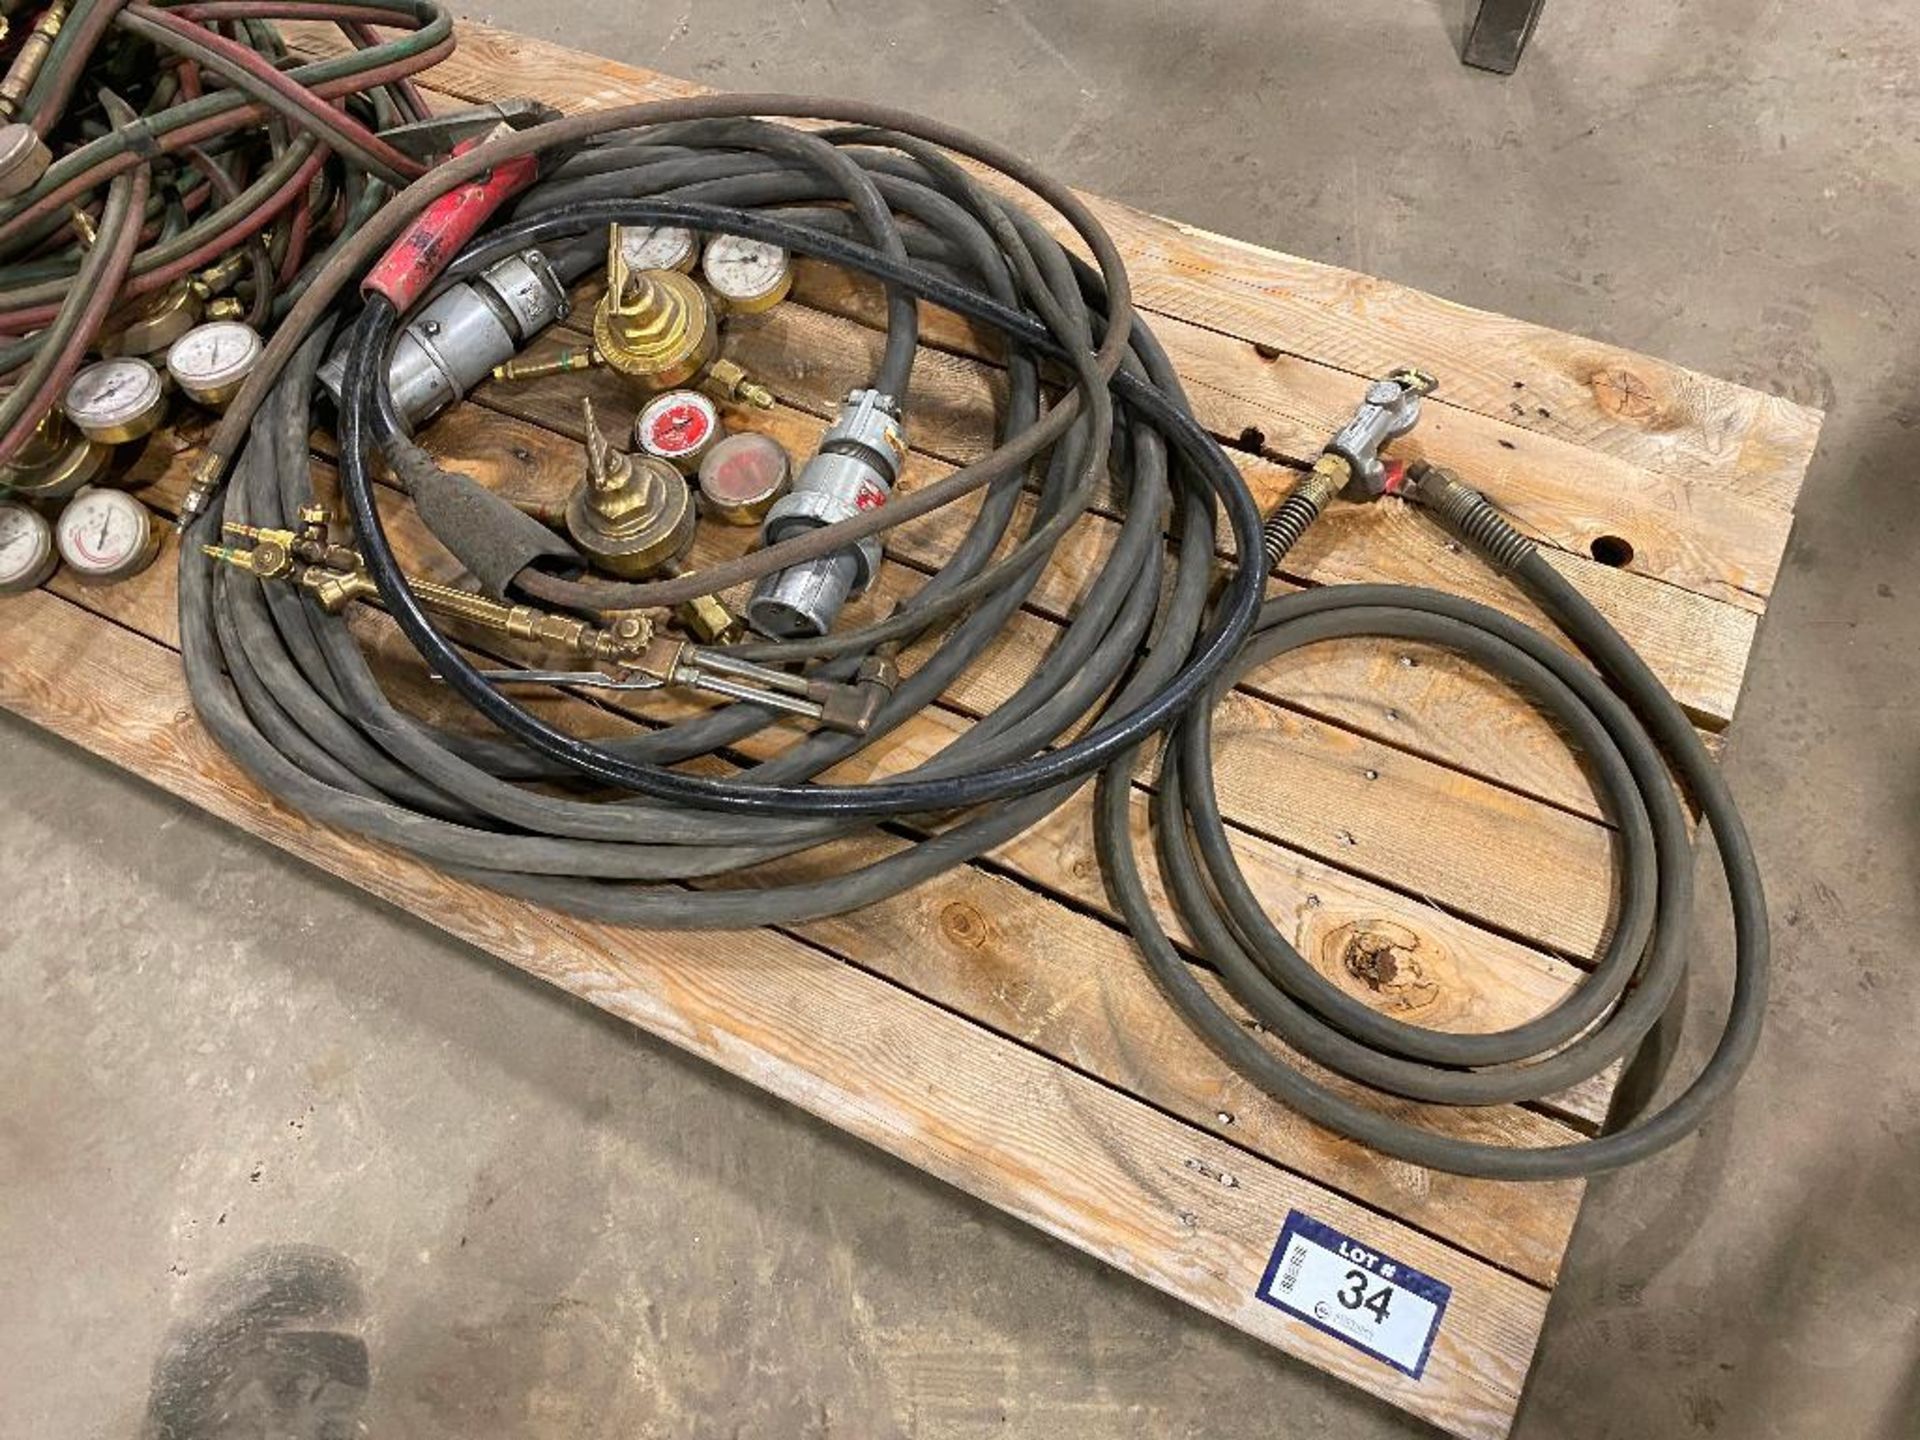 Lot of Asst. Oxy/Acetylene Hoses, Gauges, Torches, Air Line, etc. - Image 2 of 3